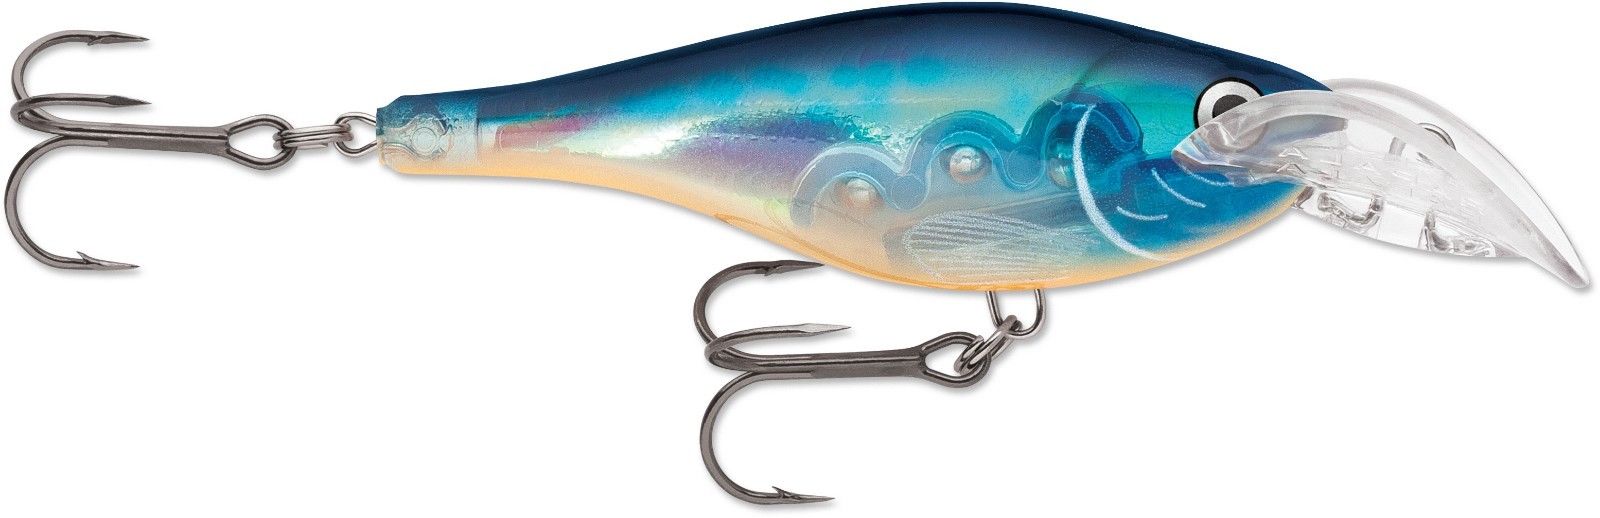 Rapala Scatter Rap Glass Shad 07 Extra Deep Diving Crankbait Blue Ghost